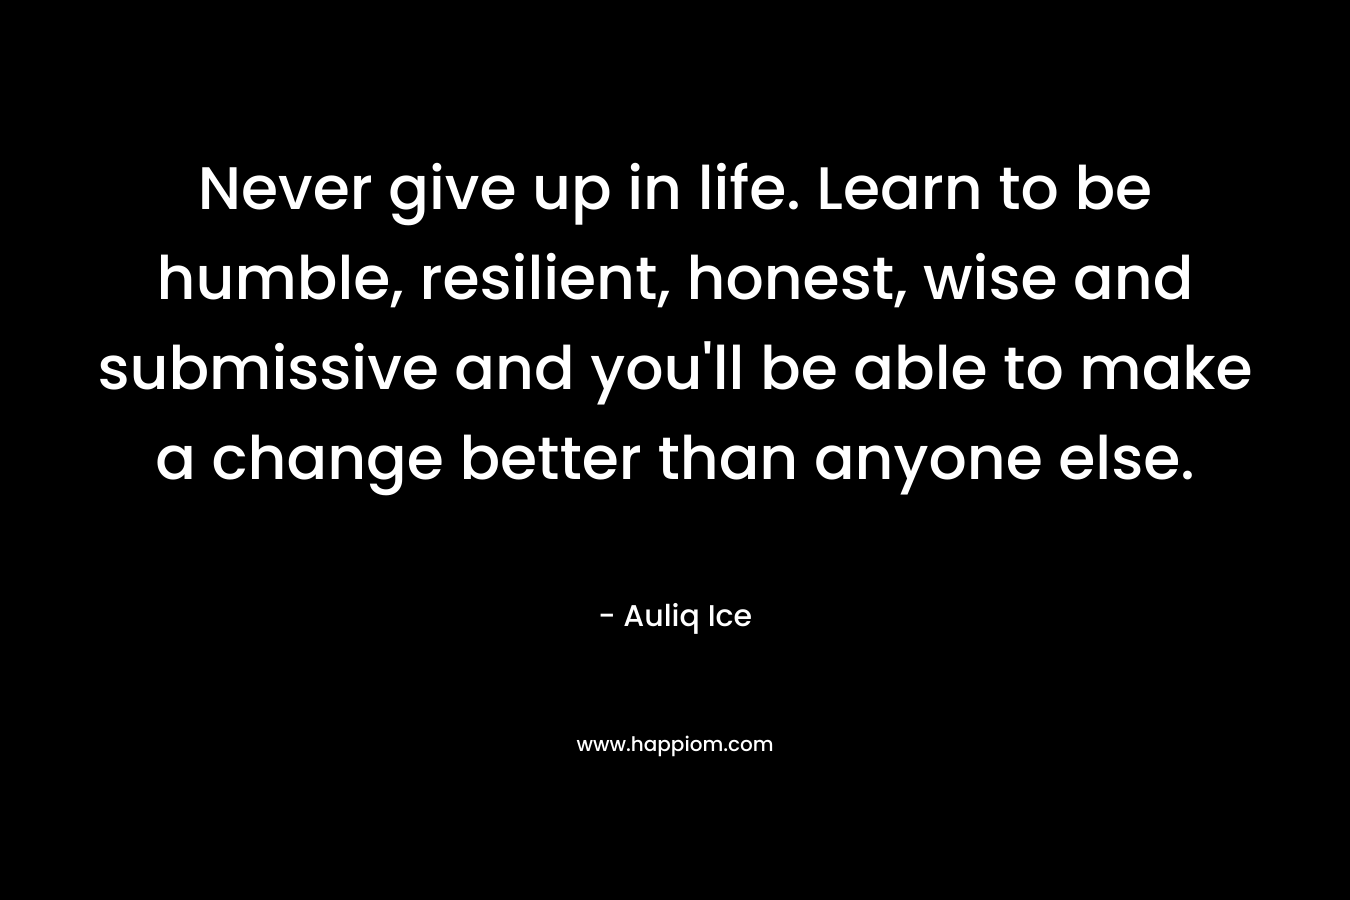 Never give up in life. Learn to be humble, resilient, honest, wise and submissive and you'll be able to make a change better than anyone else.